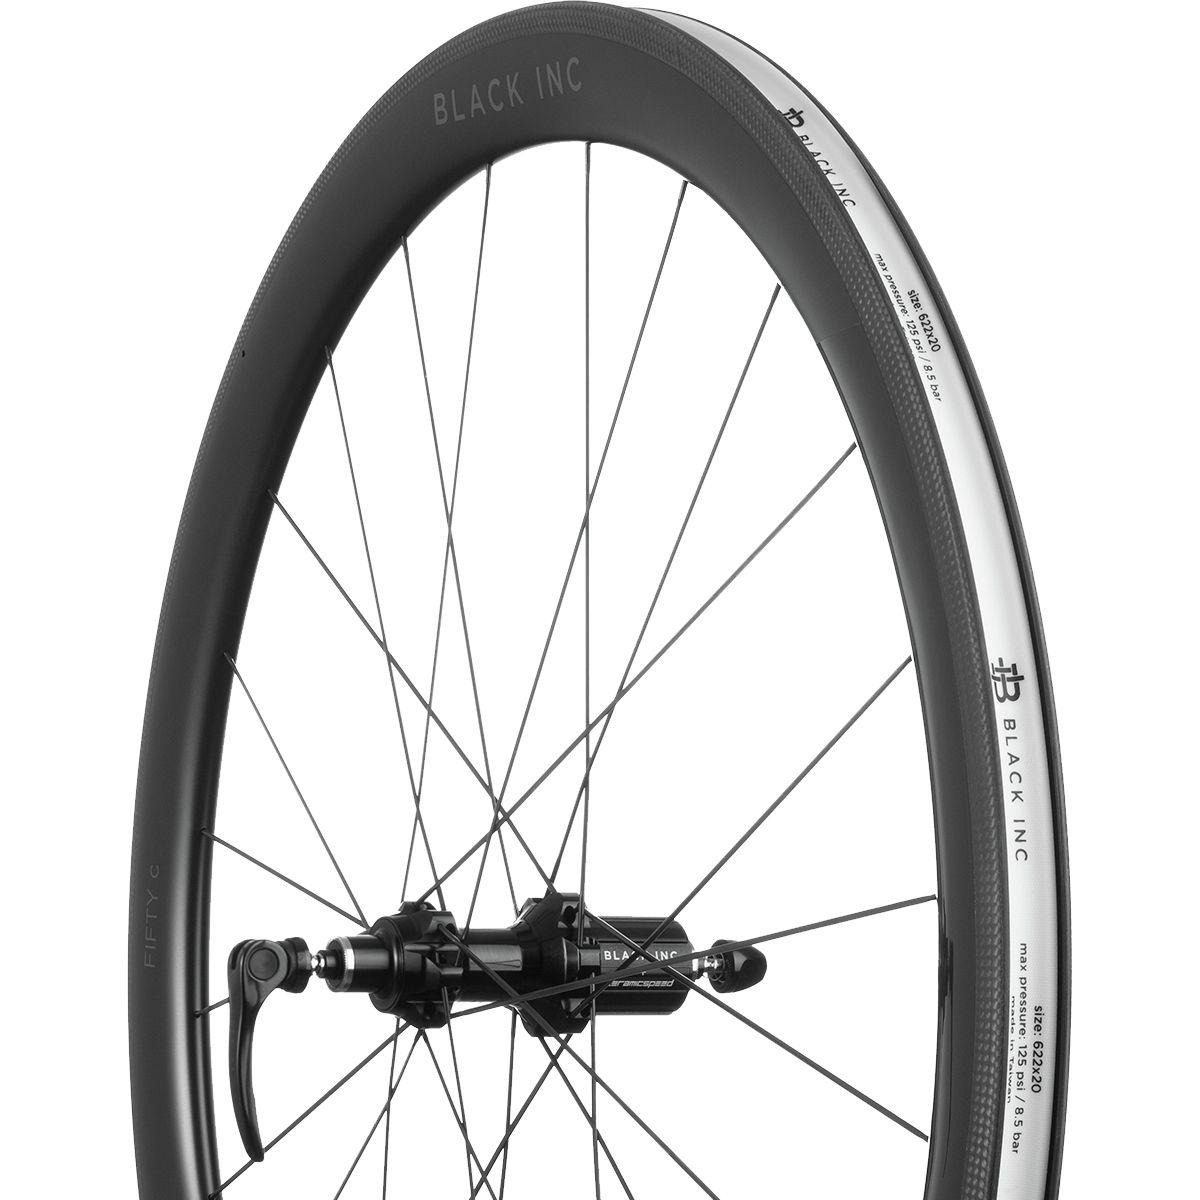 Black Inc Fifty Carbon Road Wheelset - Clincher